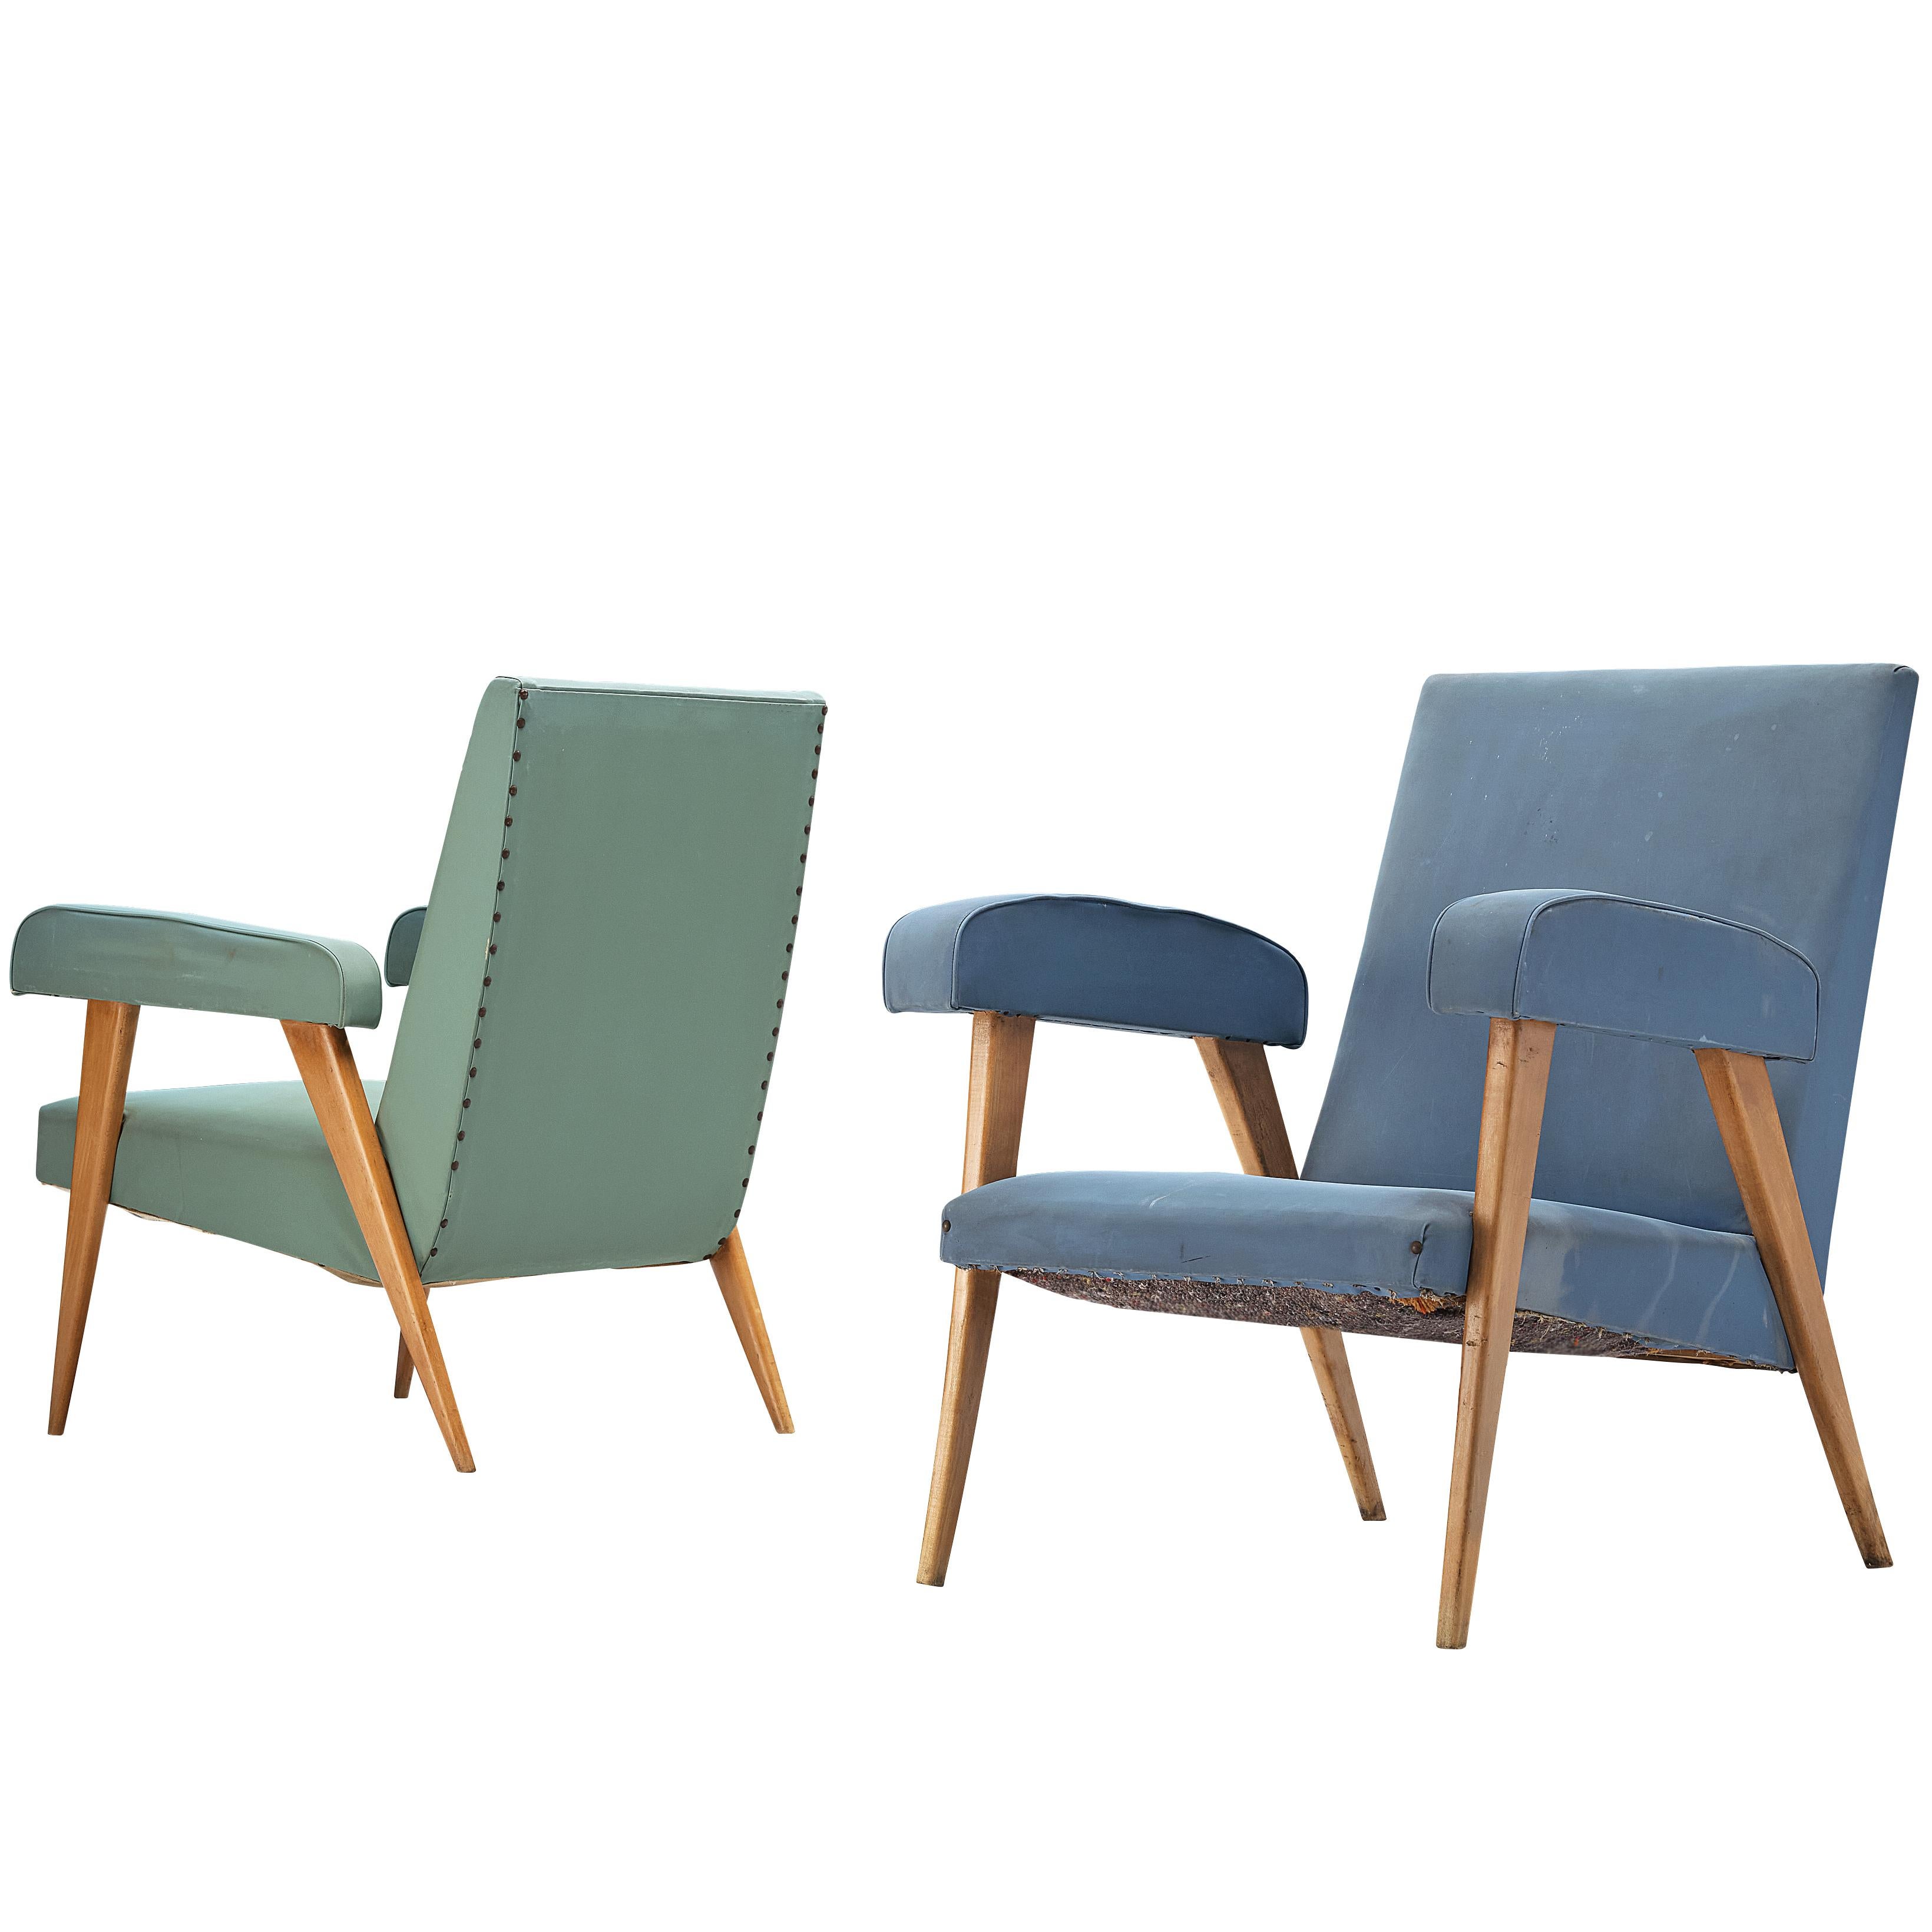 Pair of Italian Lounge Chairs in Blue and Green Upholstery